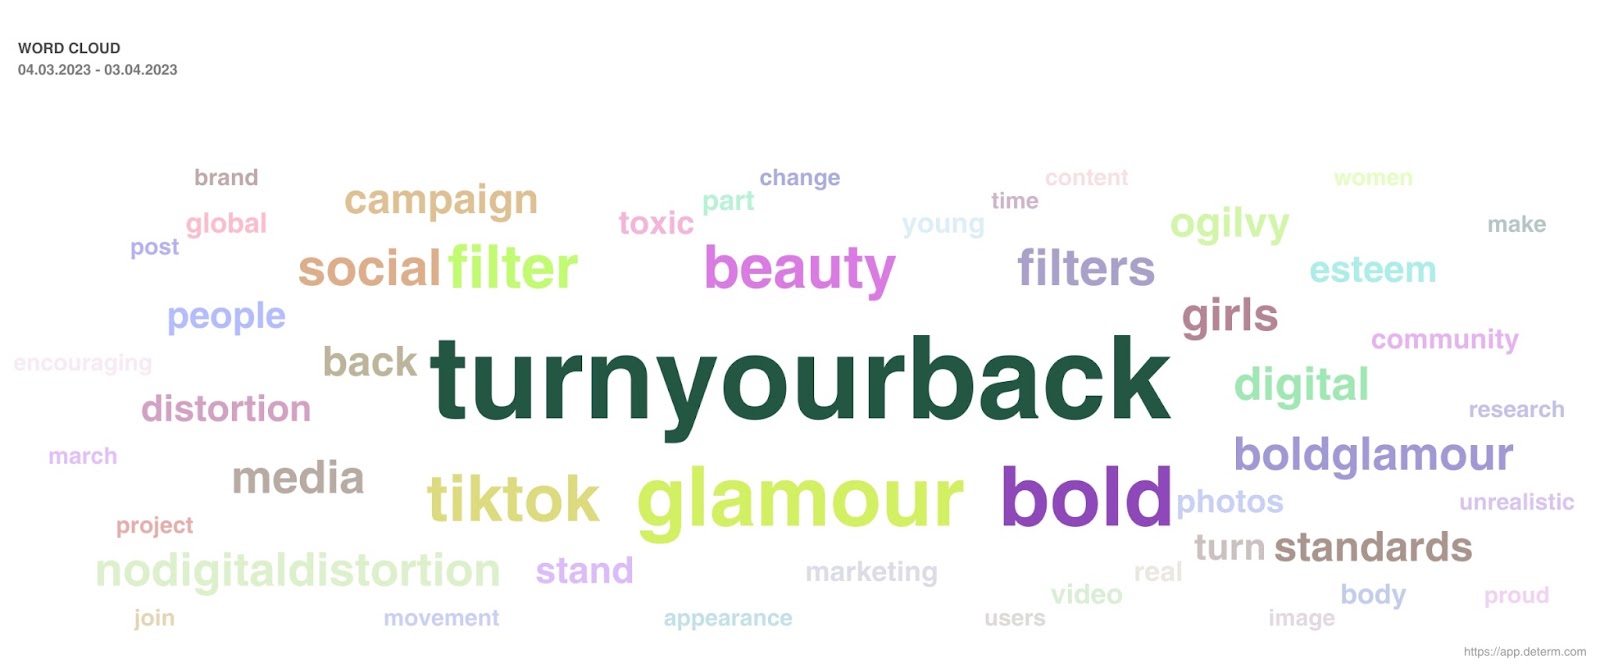 Word cloud for Dove's #TurnYourBack campaign